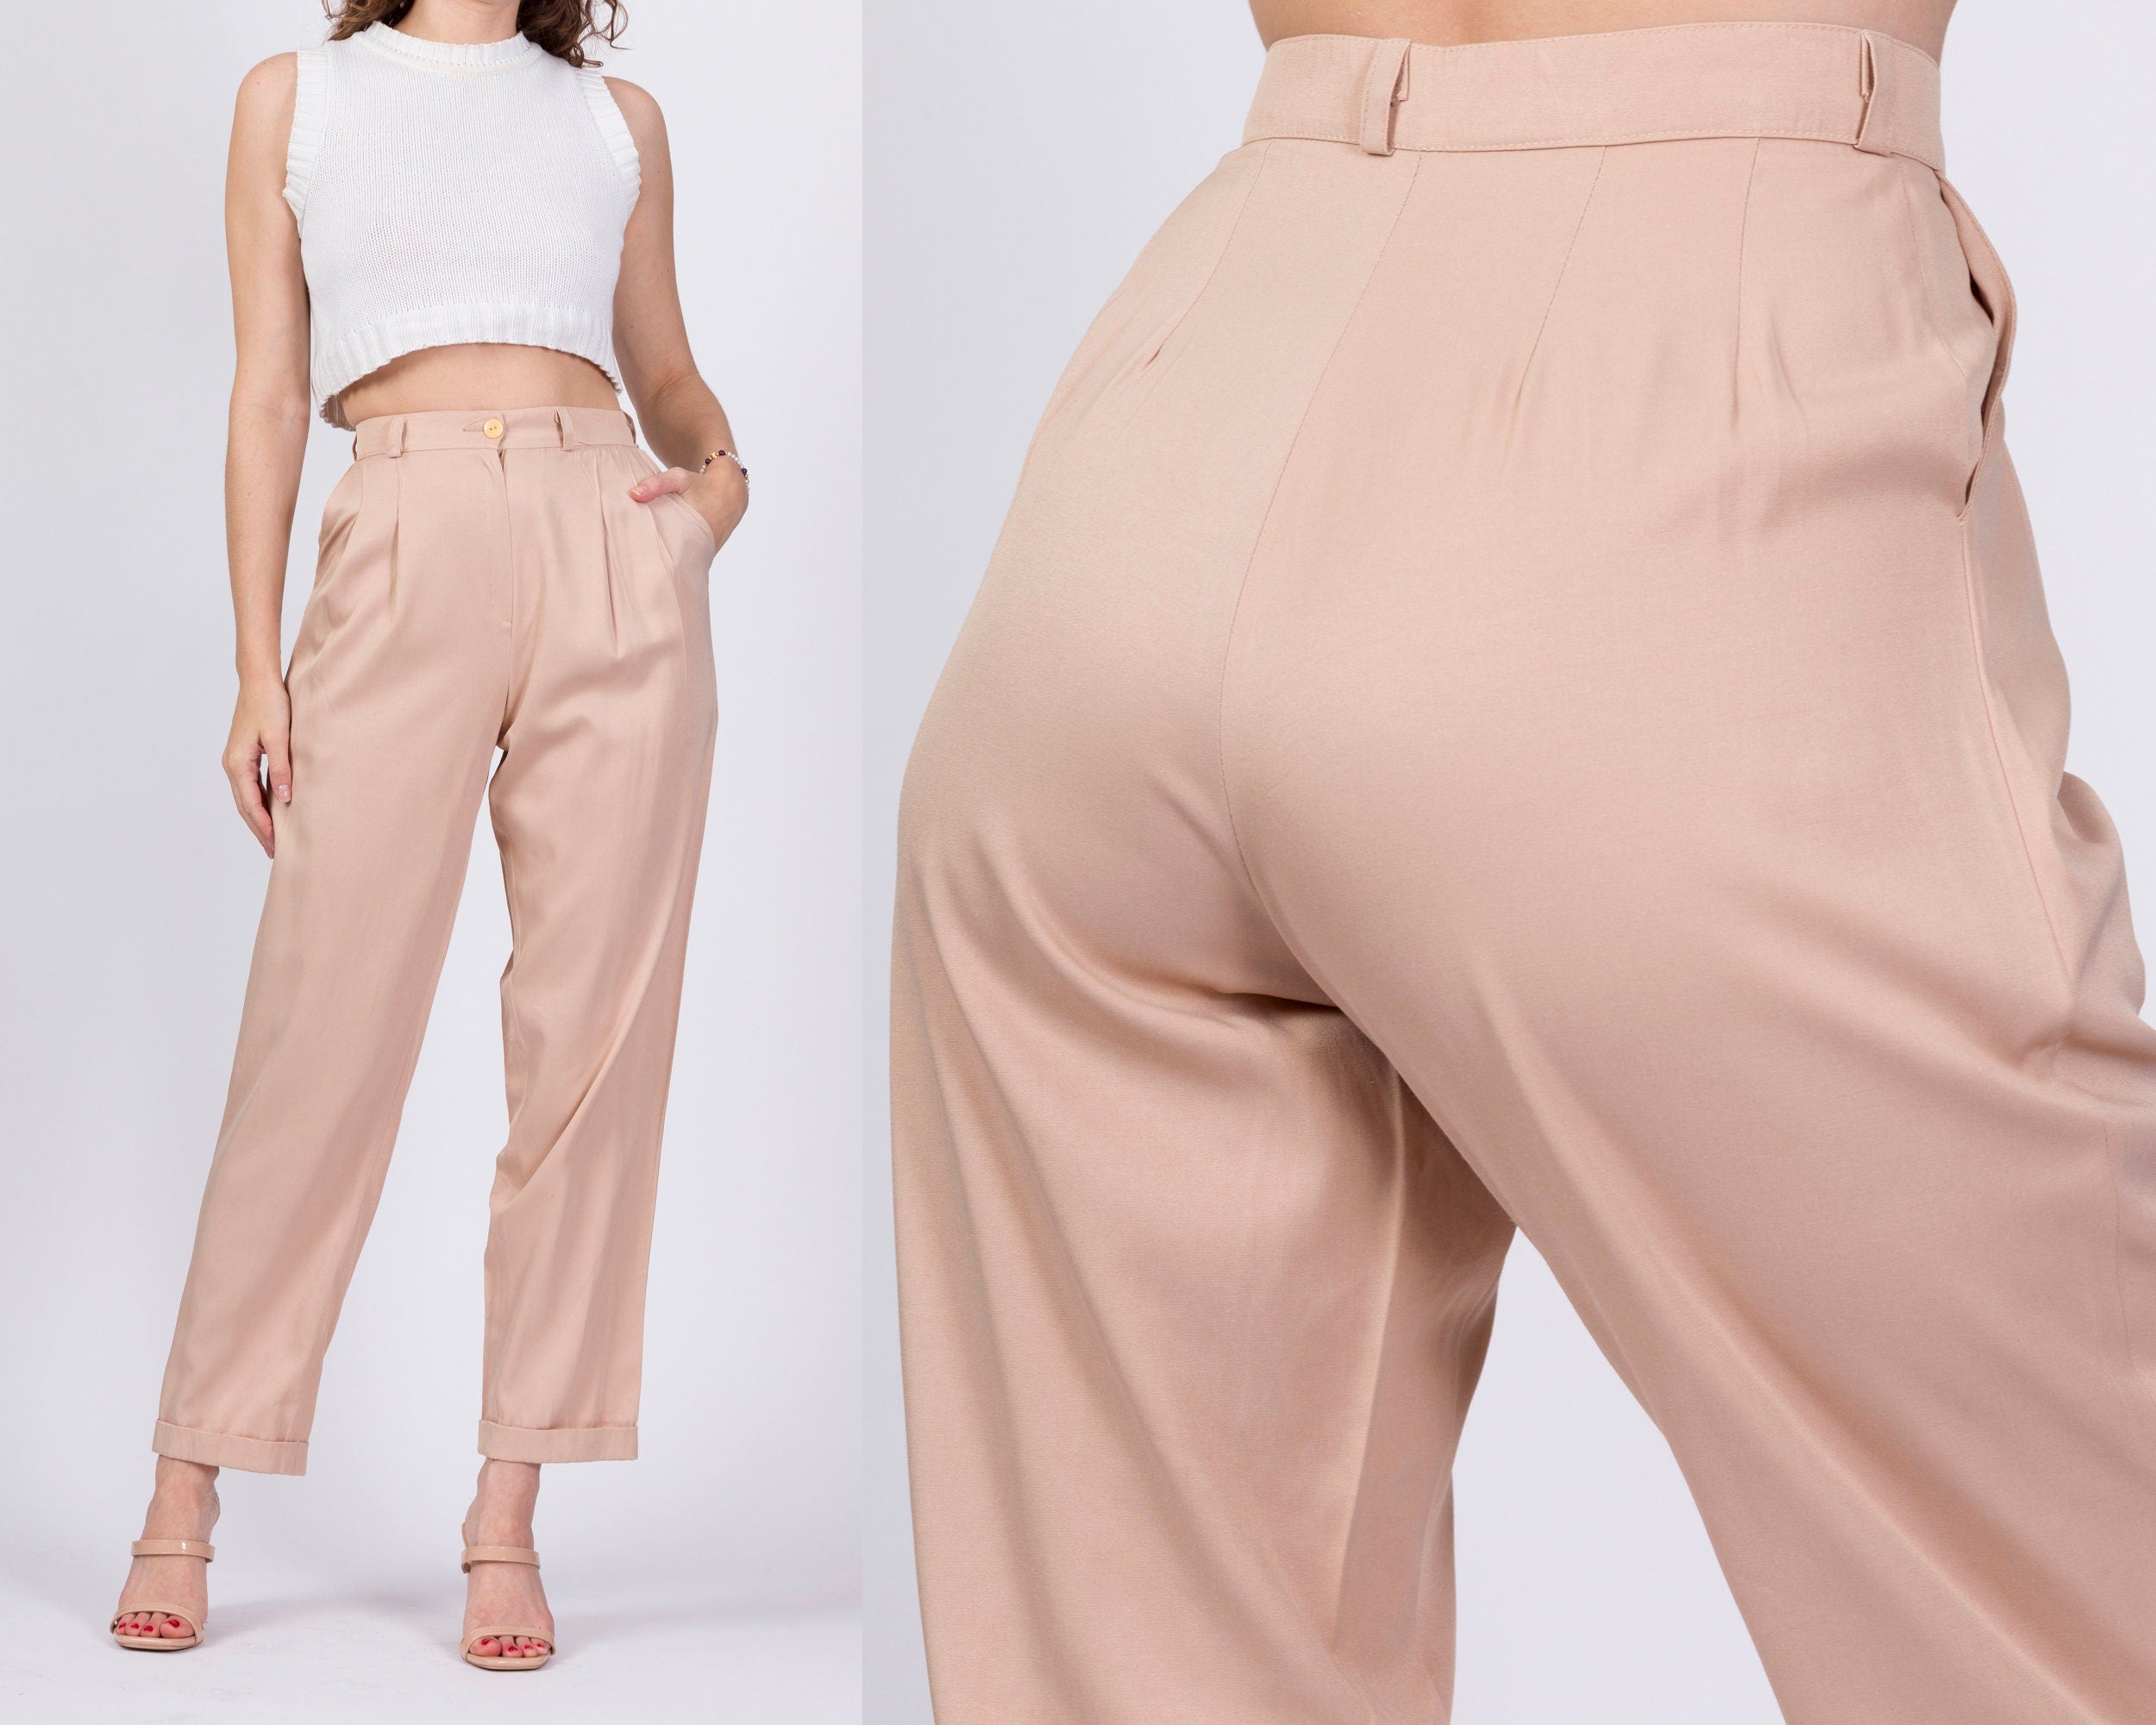 Buy High Waist Trousers Online In India  Etsy India